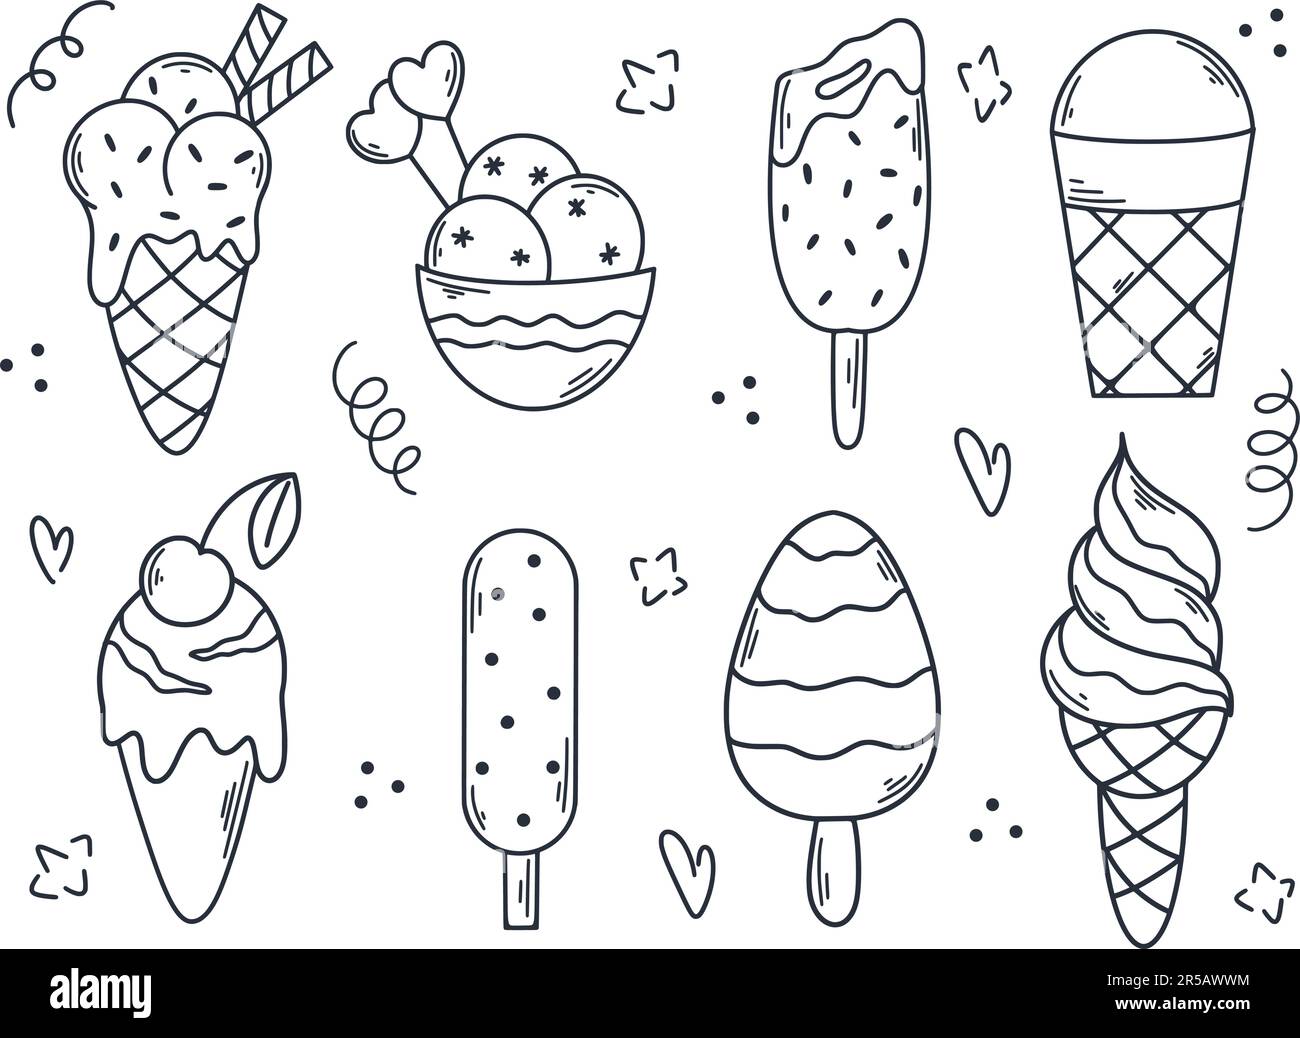 Hand drawn ice cream of different types set. Icecream cone, popsicle, sundae, bowl balls, ice lolly, chocolate dessert collection. Icecream ink doodle Stock Vector